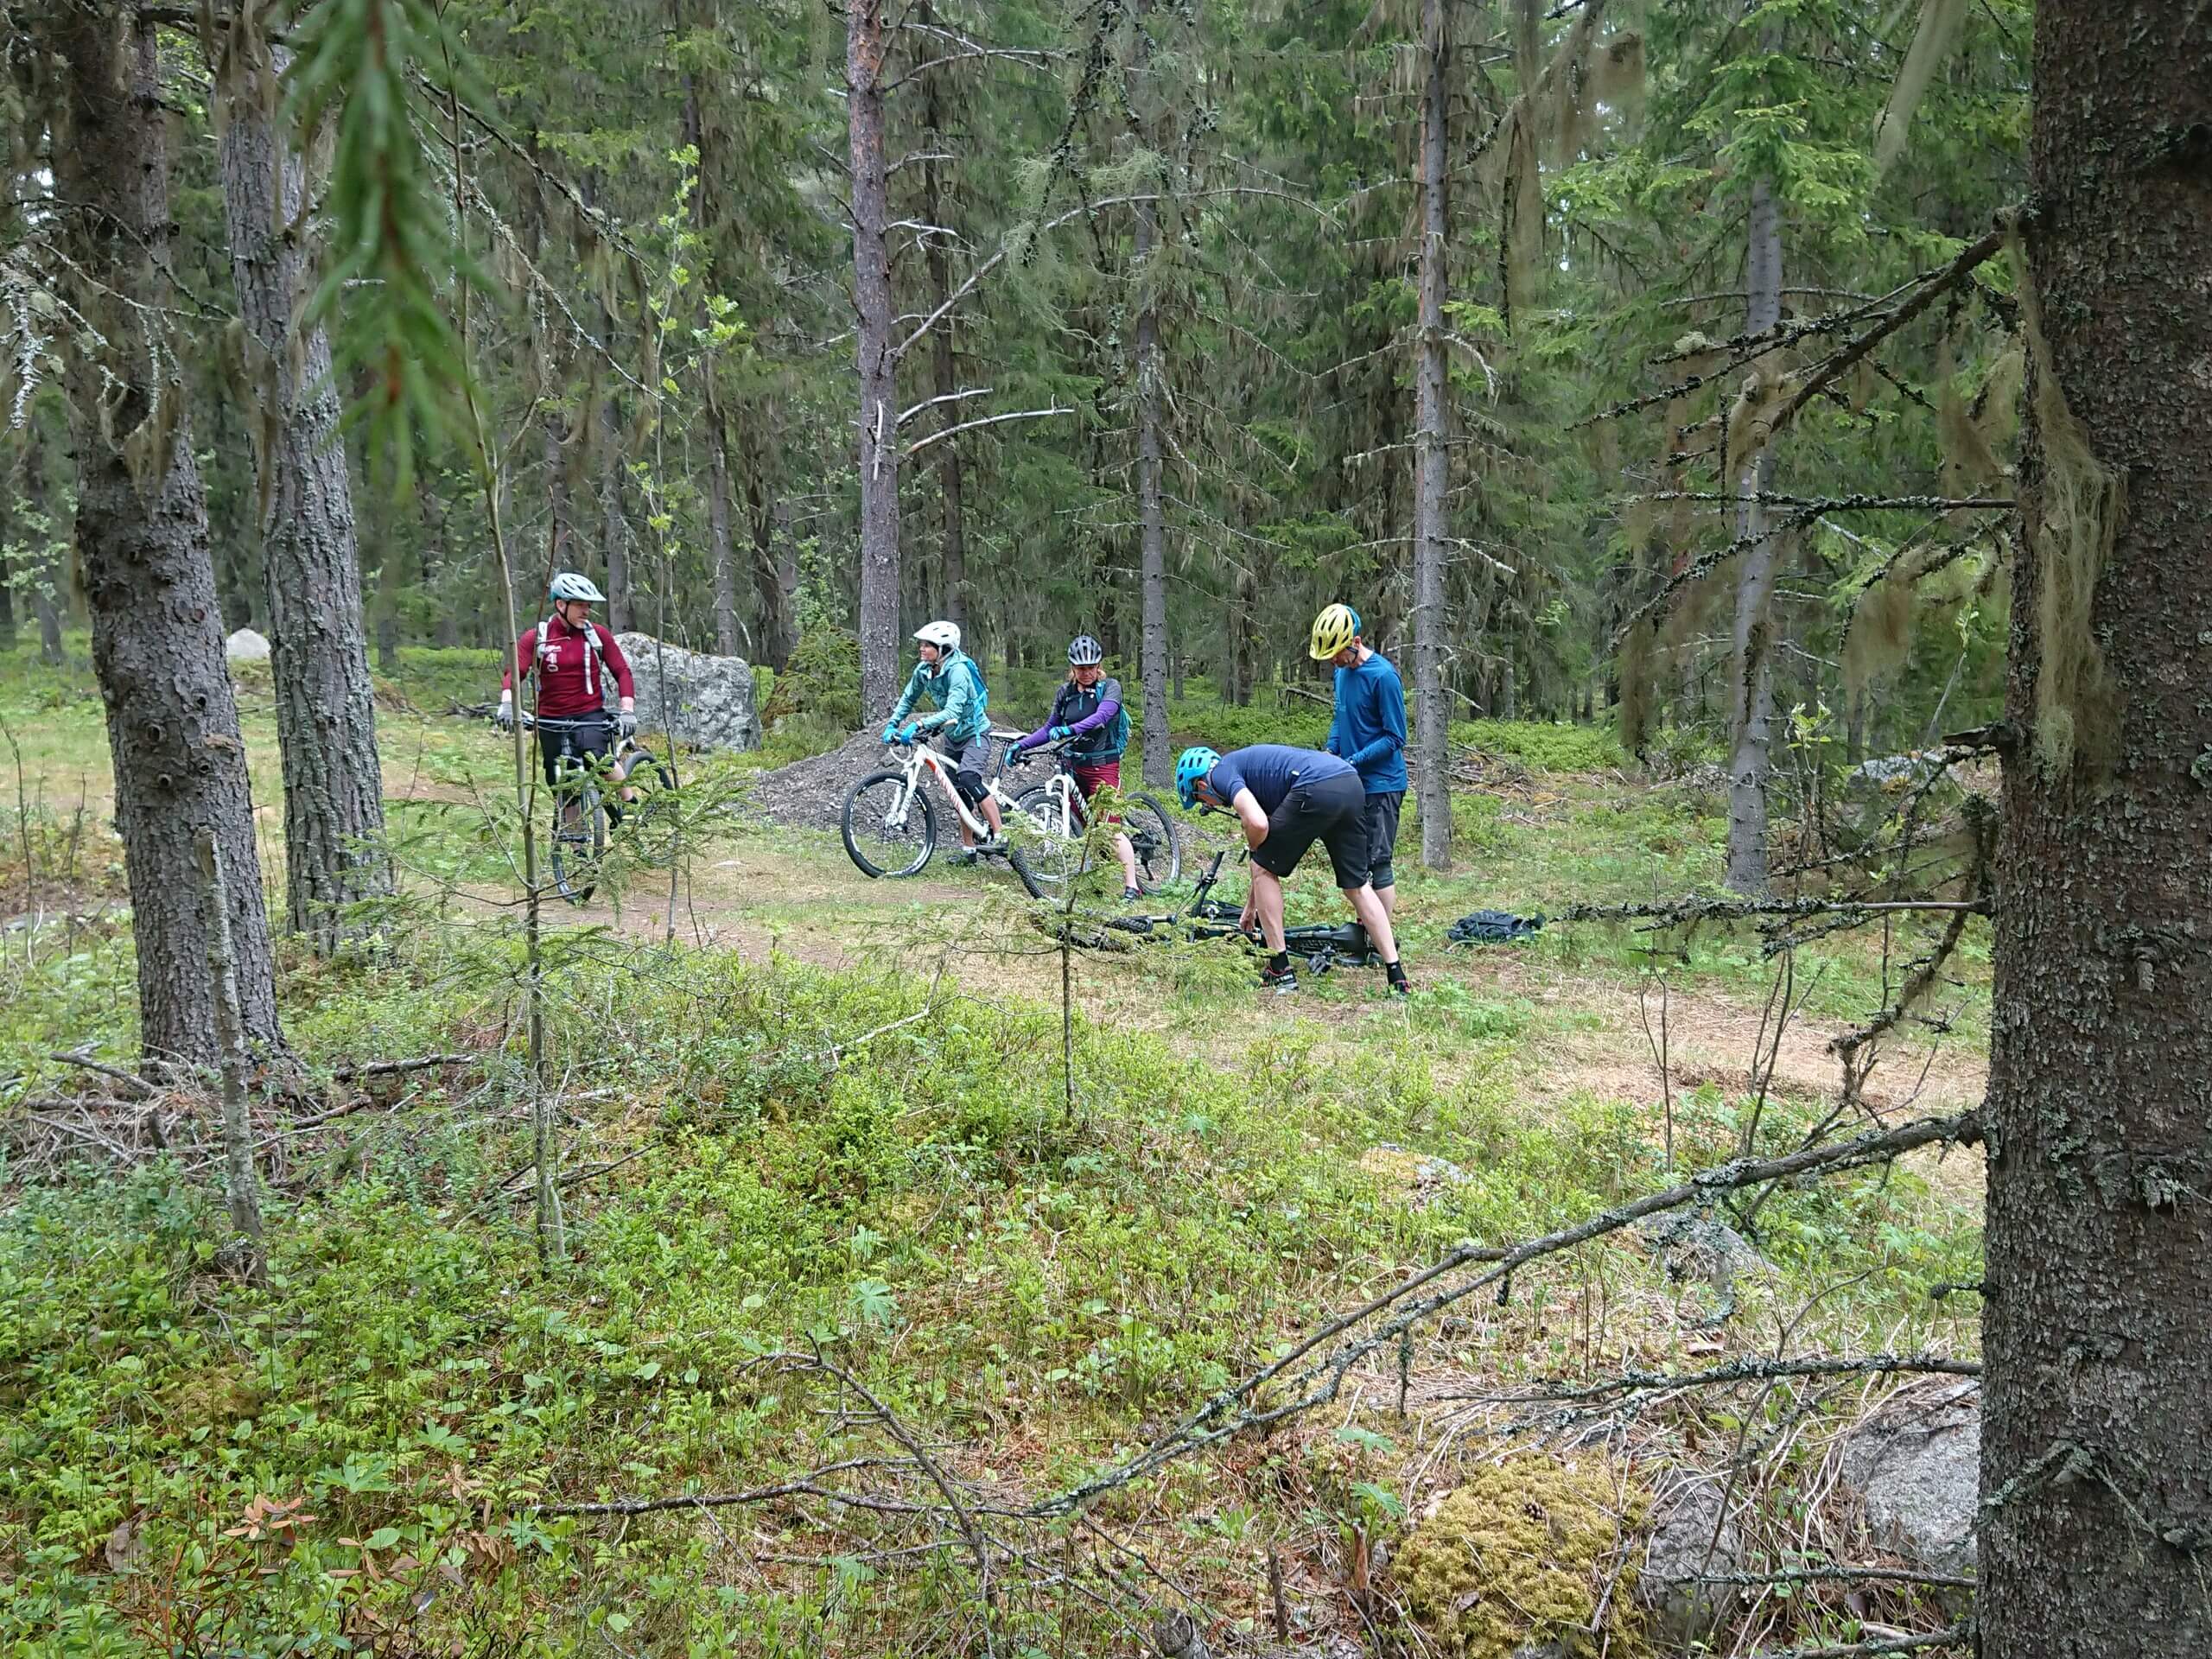 Group of bikers in Swedish forests